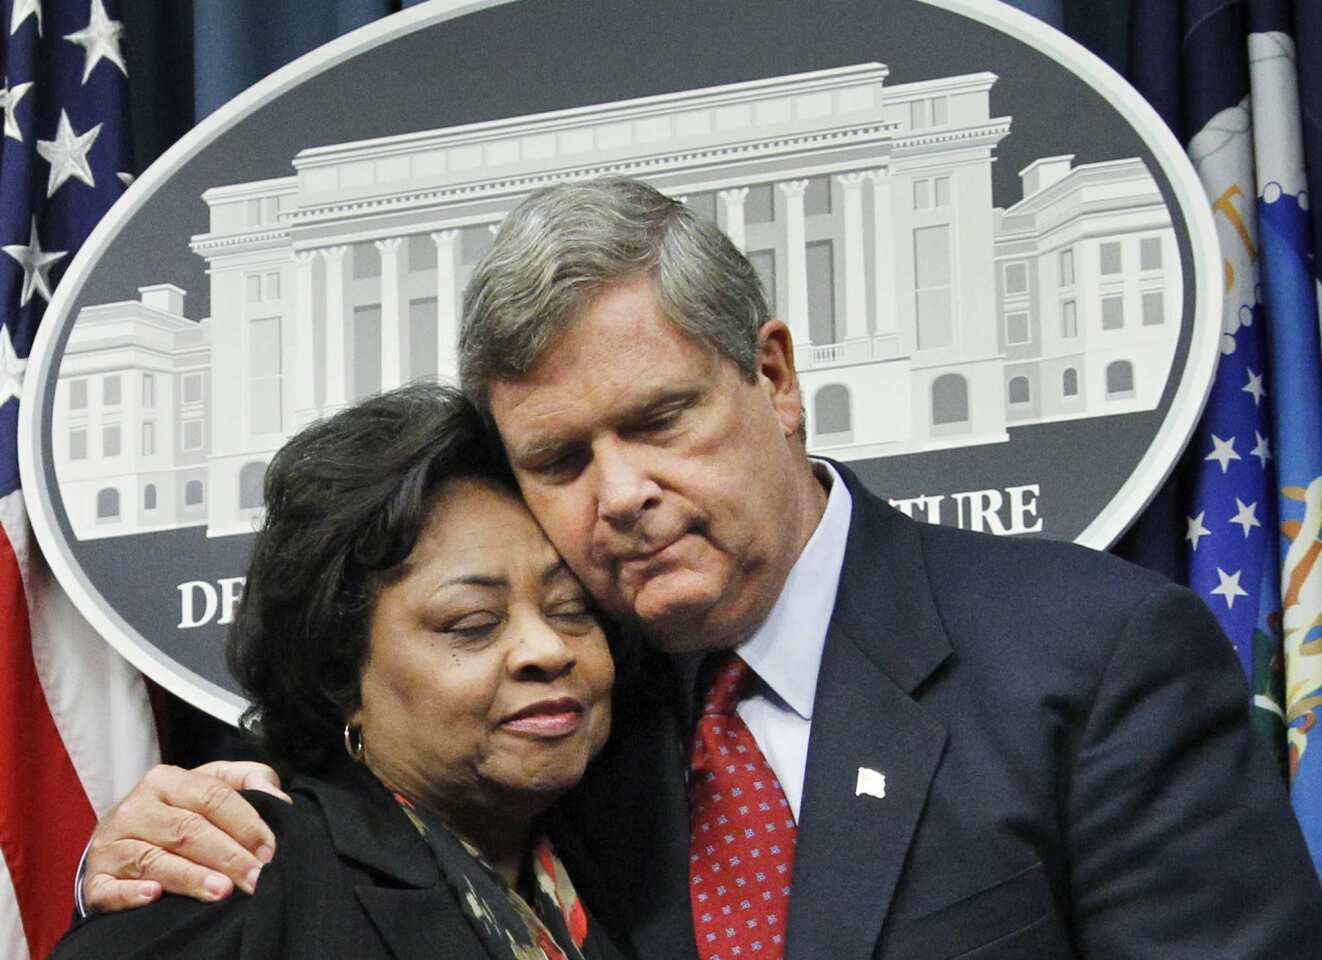 In July 2010 on BigGovernment.com, Breitbart posted a video of Shirley Sherrod, the Georgia state director of rural development for the U.S. Department of Agriculture, appearing to make racial comments while speaking at an NAACP event. Breitbart accompanied the video with his own lengthy commentary. Sherrod was promptly asked to resign. Soon after her departure, the unedited video was released by the NAACP proving that Sherrod's comments had been taken out of context. Sherrod received an apology from the White House, a phone call from President Obama and was offered a new position with the USDA, but she declined. Breitbart added a correction to his blog post but never apologized. Sherrod came at him and his partner Larry O'Connor with a defamation suit in 2011, and the case is ongoing.